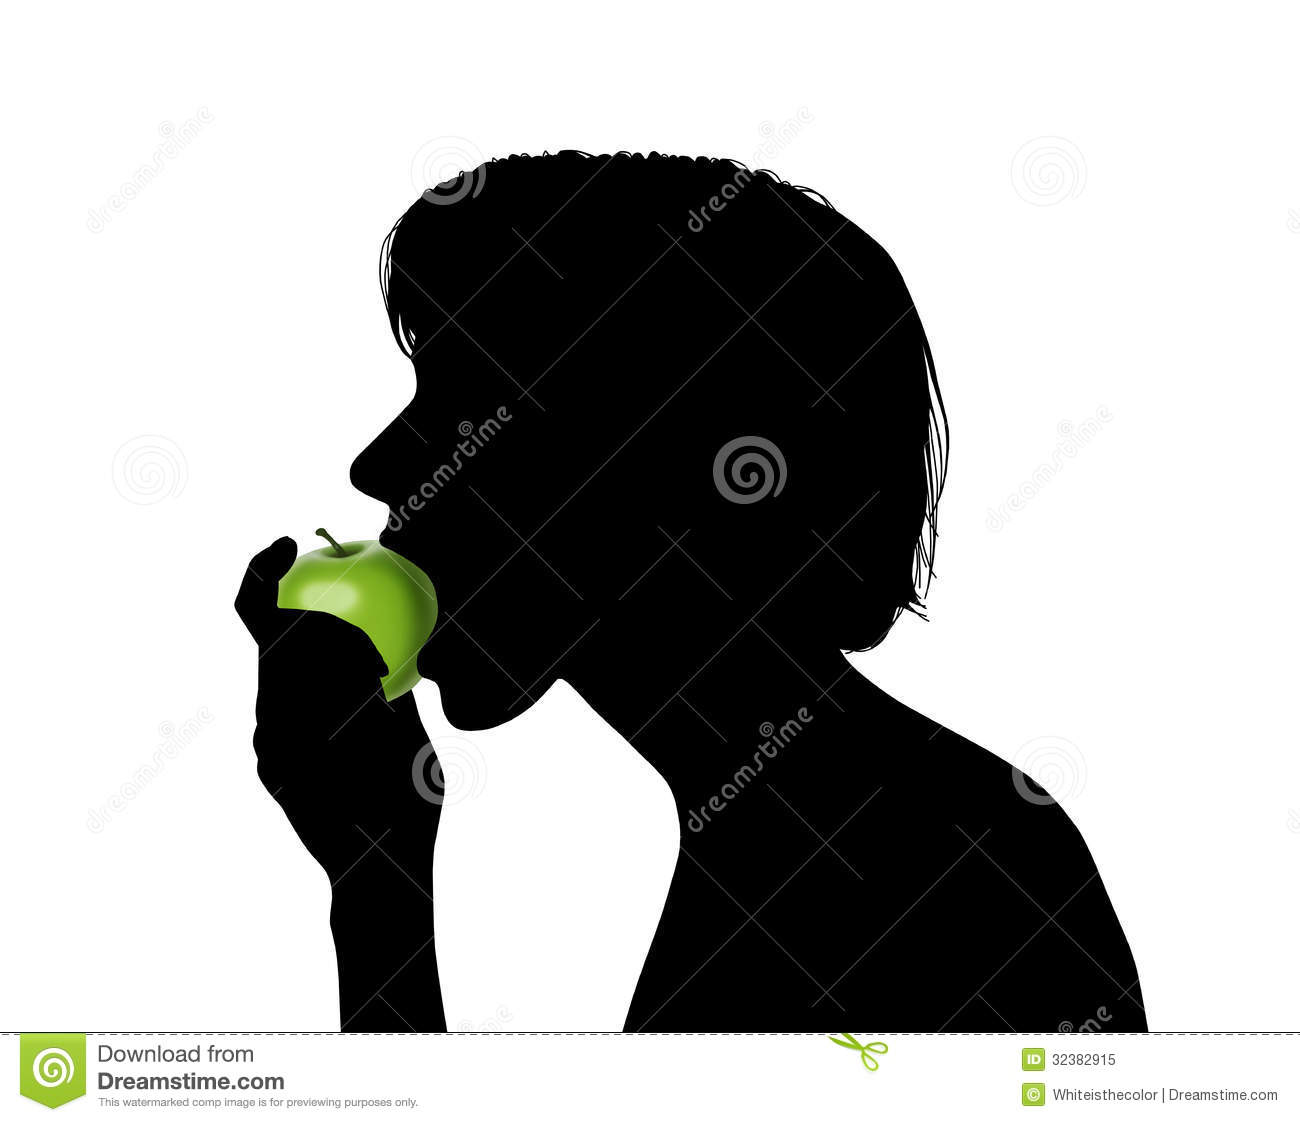 Woman Eating A Green Apple Silhouette Royalty Free Stock Photo   Image